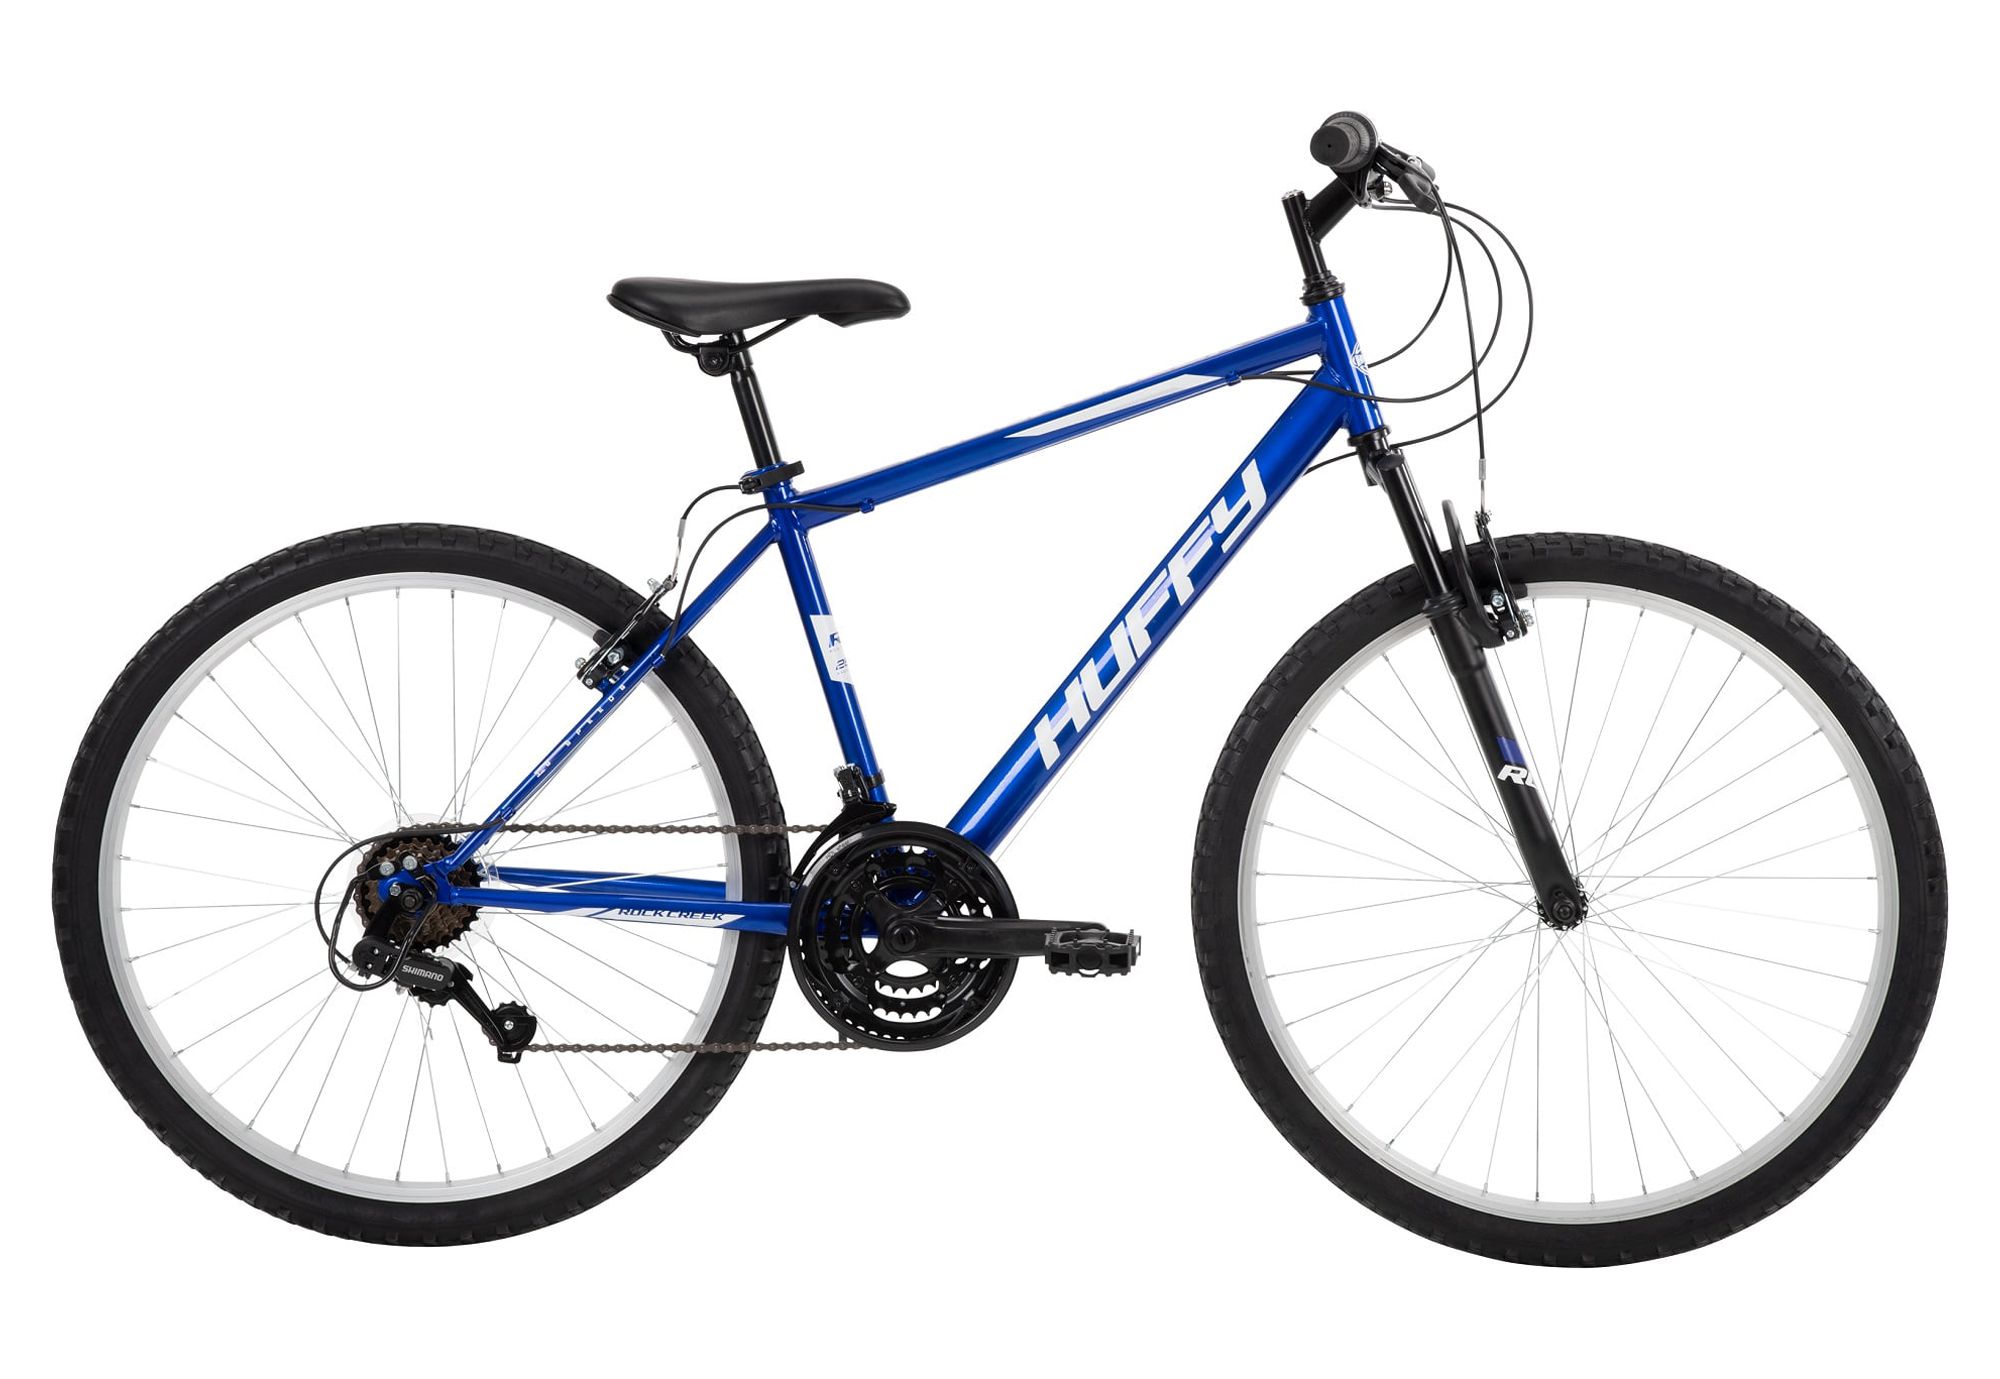 Huffy 26-inch Rock Creek Men's Mountain Bike, Ages 13 and Up, Blue - image 1 of 13